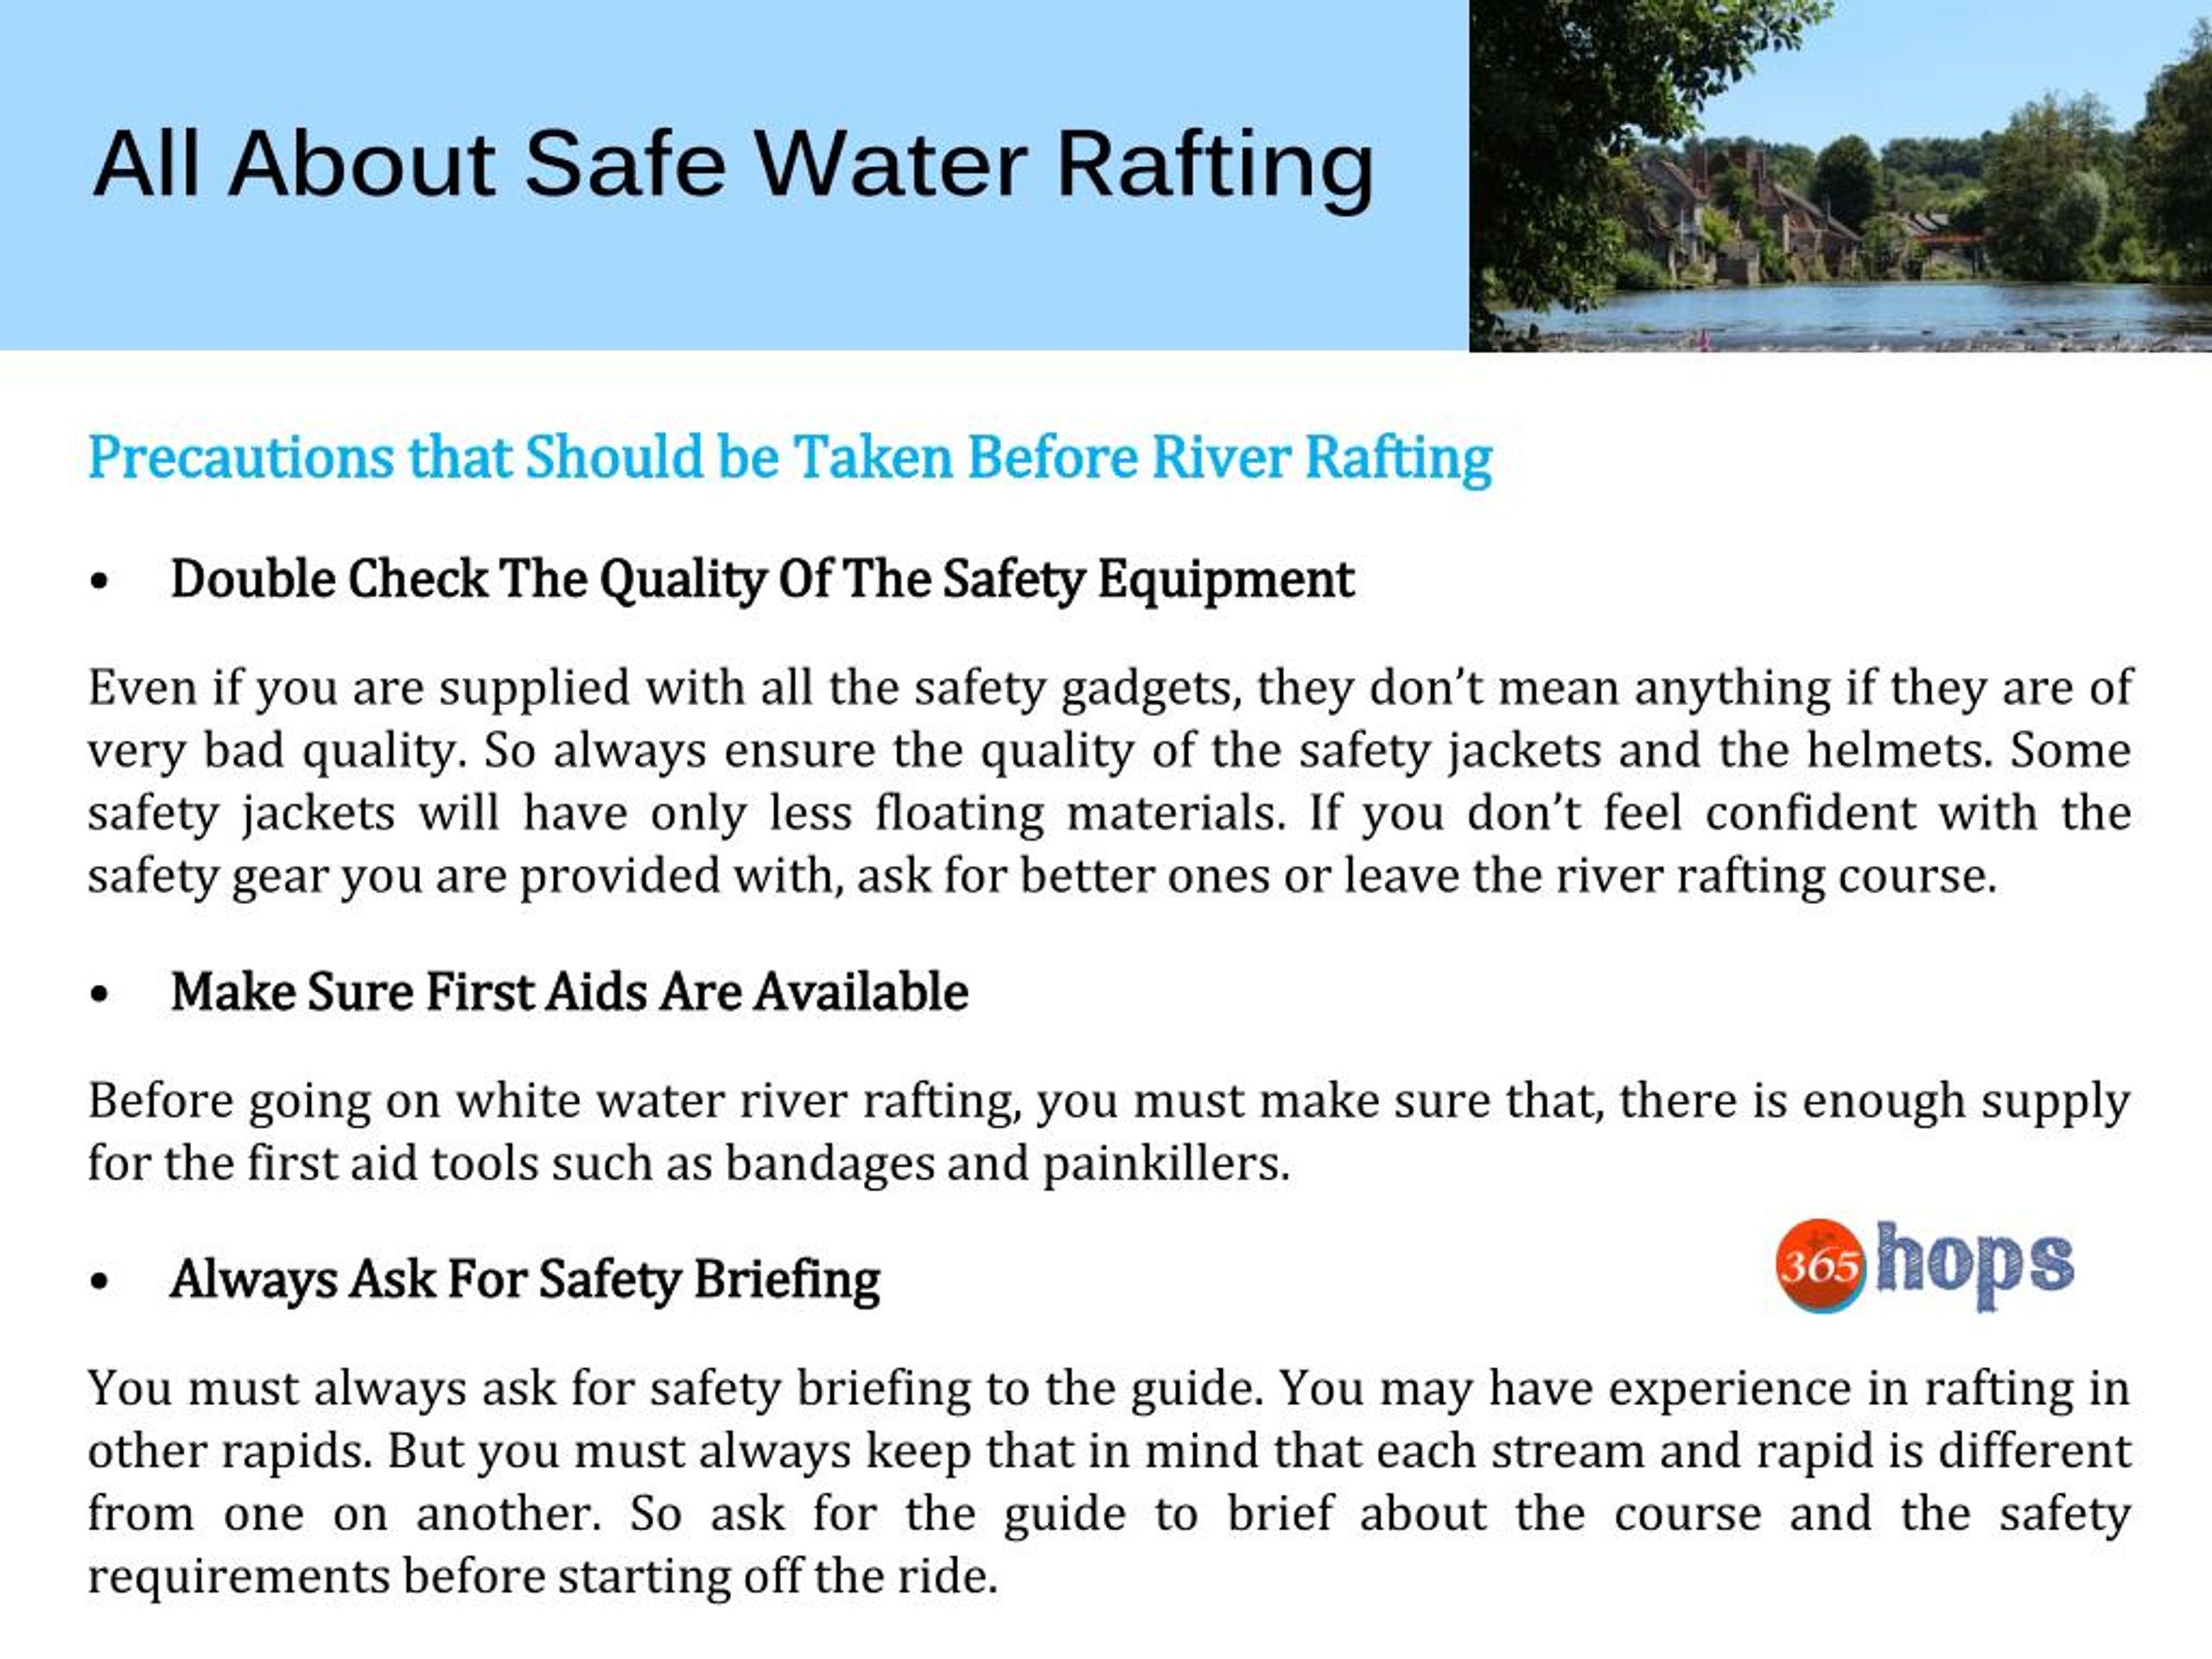 PPT - All About Safe White Water River Rafting PowerPoint Presentation ...